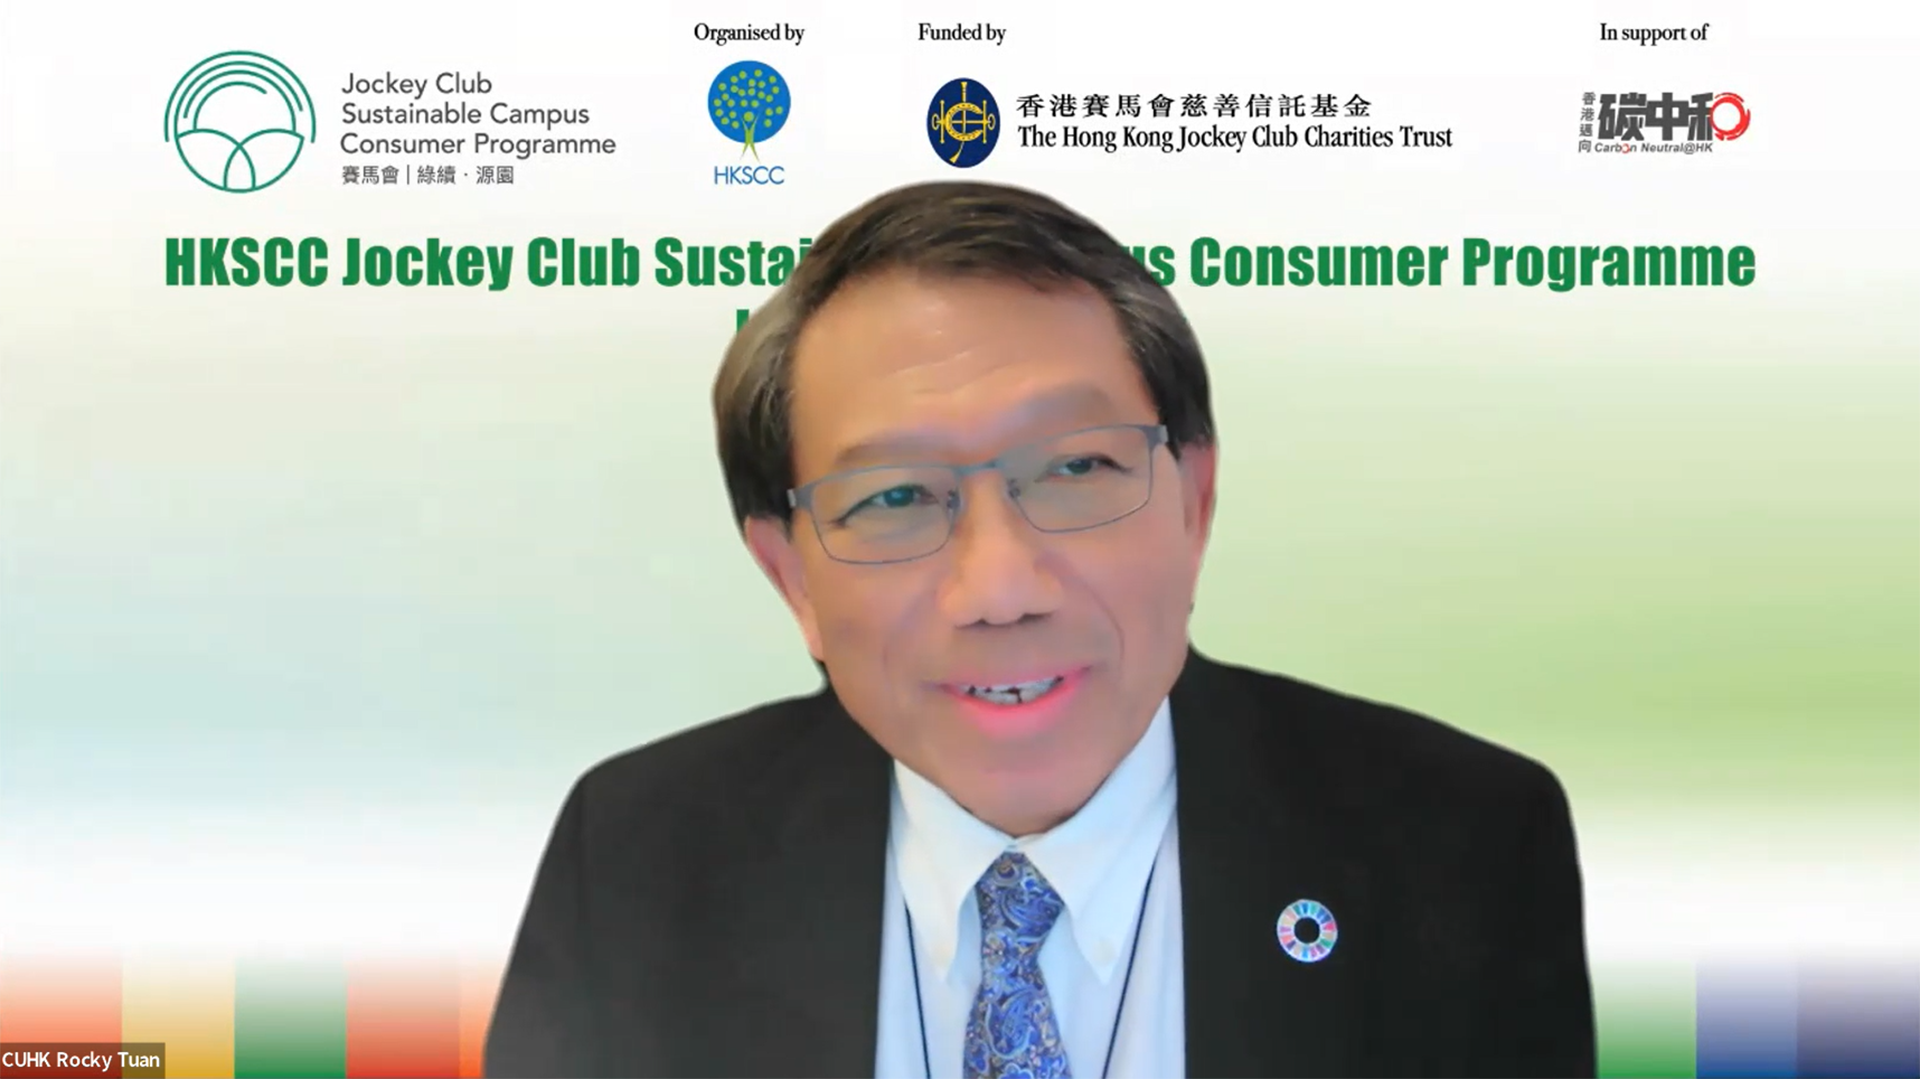 Professor Rocky S. Tuan, Vice-Chancellor and President of CUHK, gives the welcome address at the Jockey Club Sustainable Campus Consumer Programme’s launch ceremony.